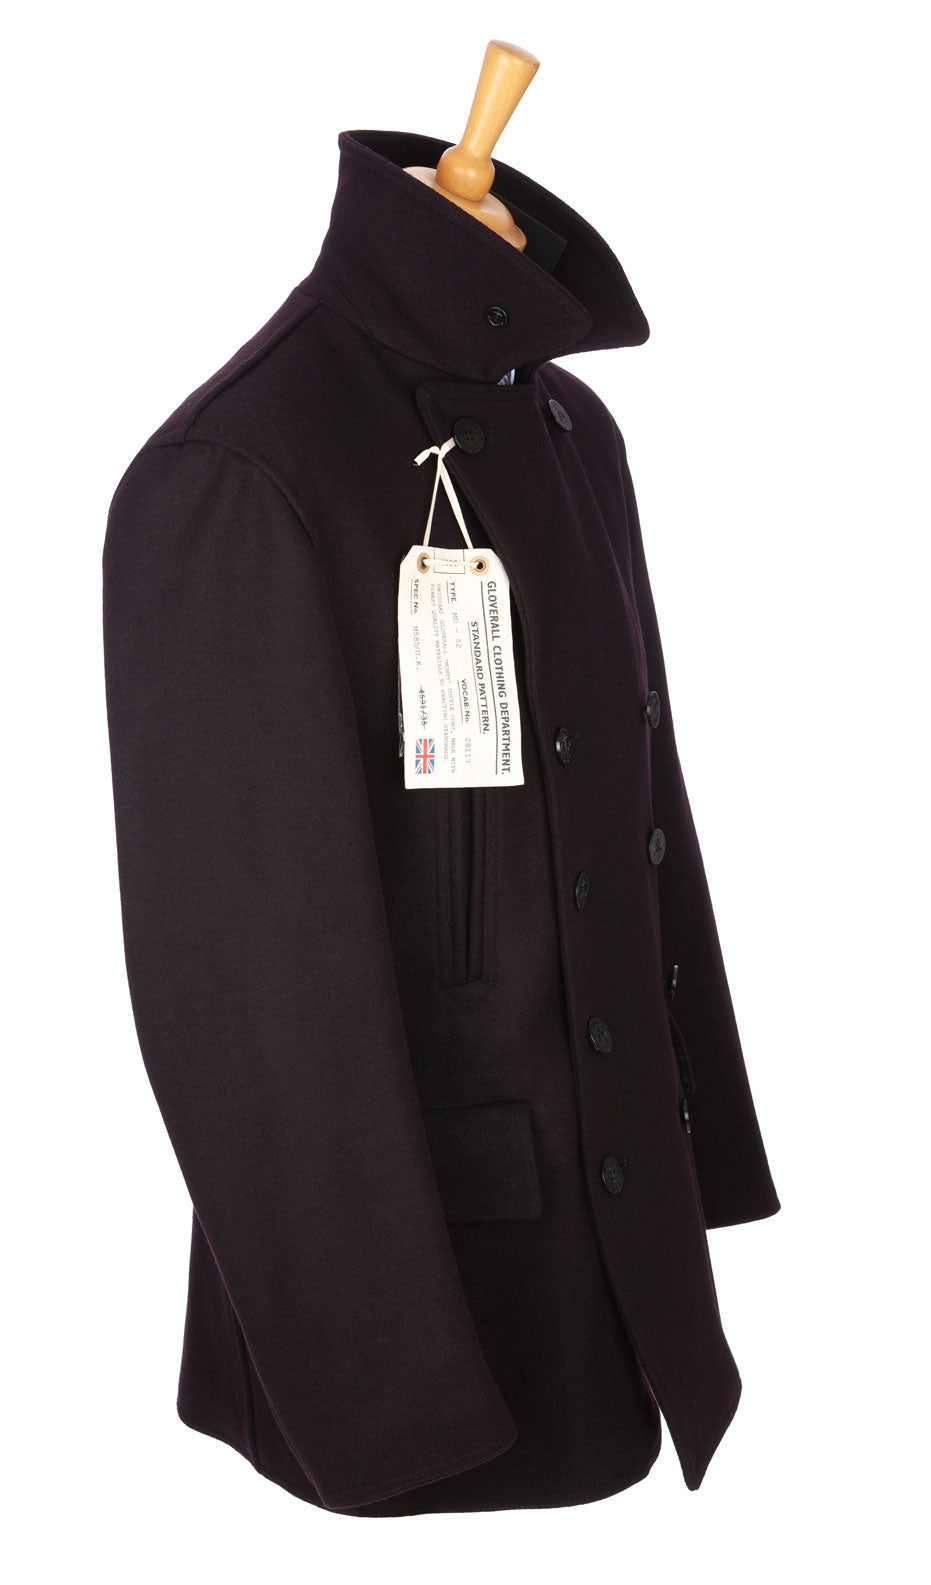 Navy English Melton wool Churchill/Reefer-style peacoat overcoat by Gloverall, English-made masters of tradition and style. 